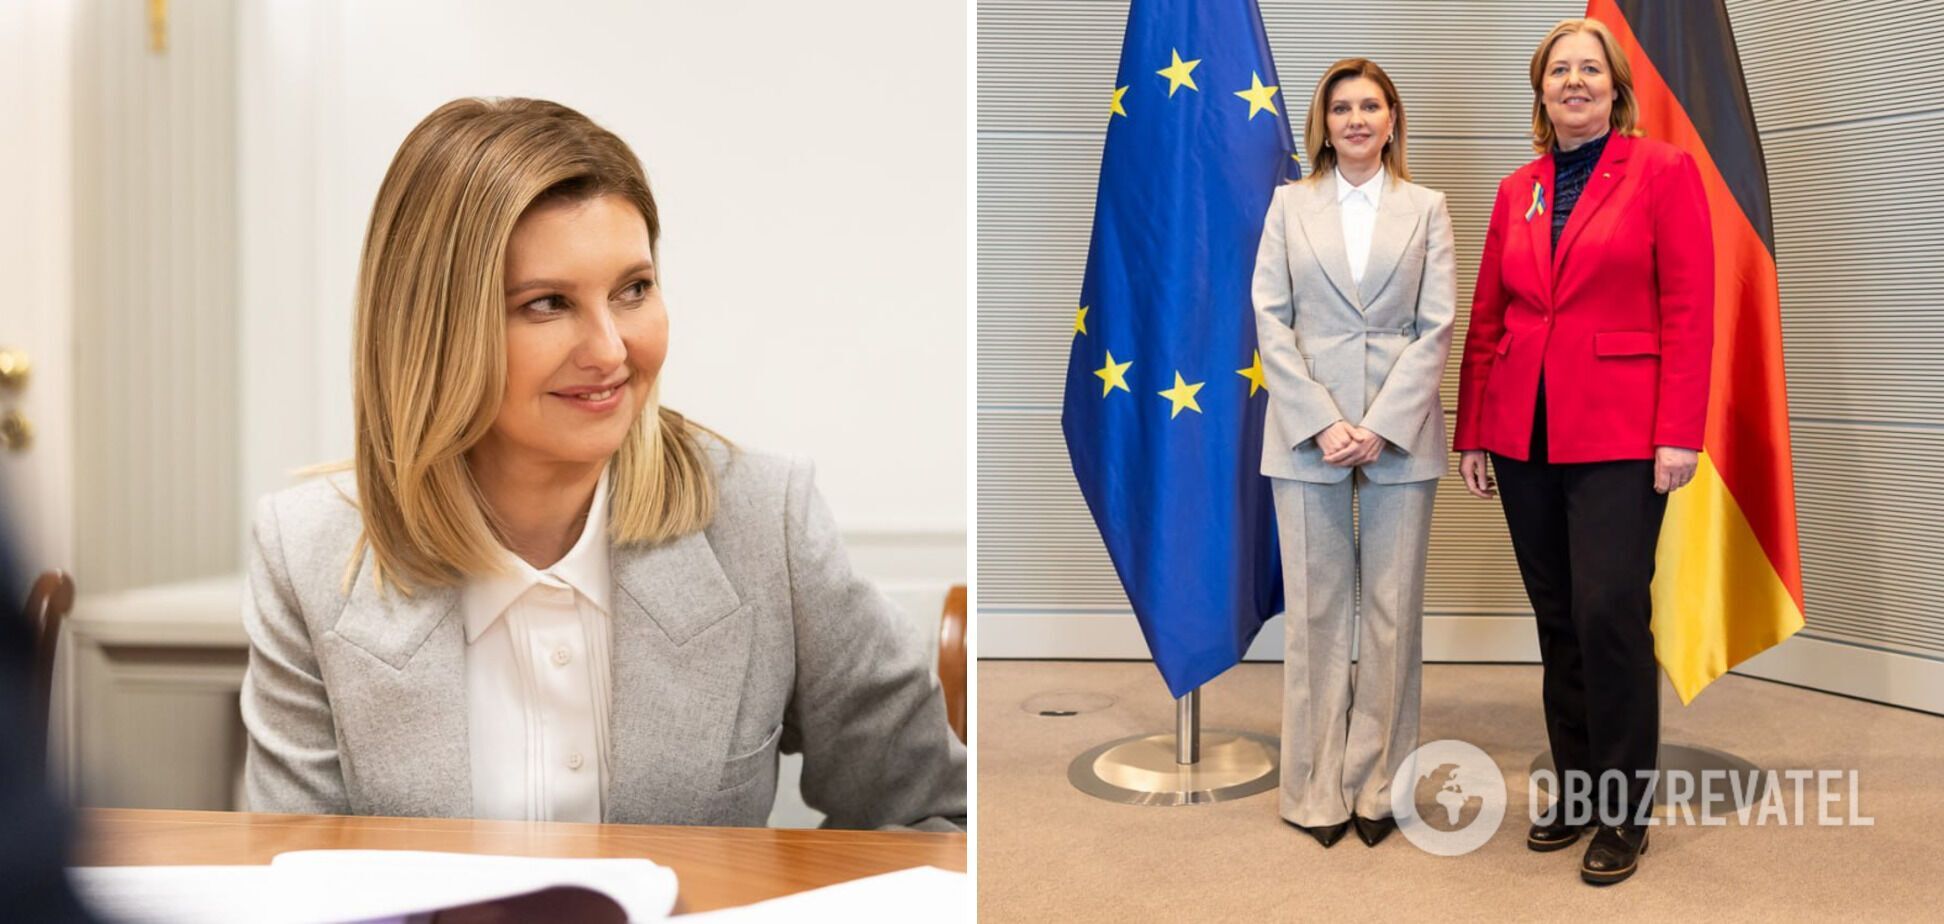 A gray suit and loafers: Zelenska chose a restrained look for her visit to Berlin